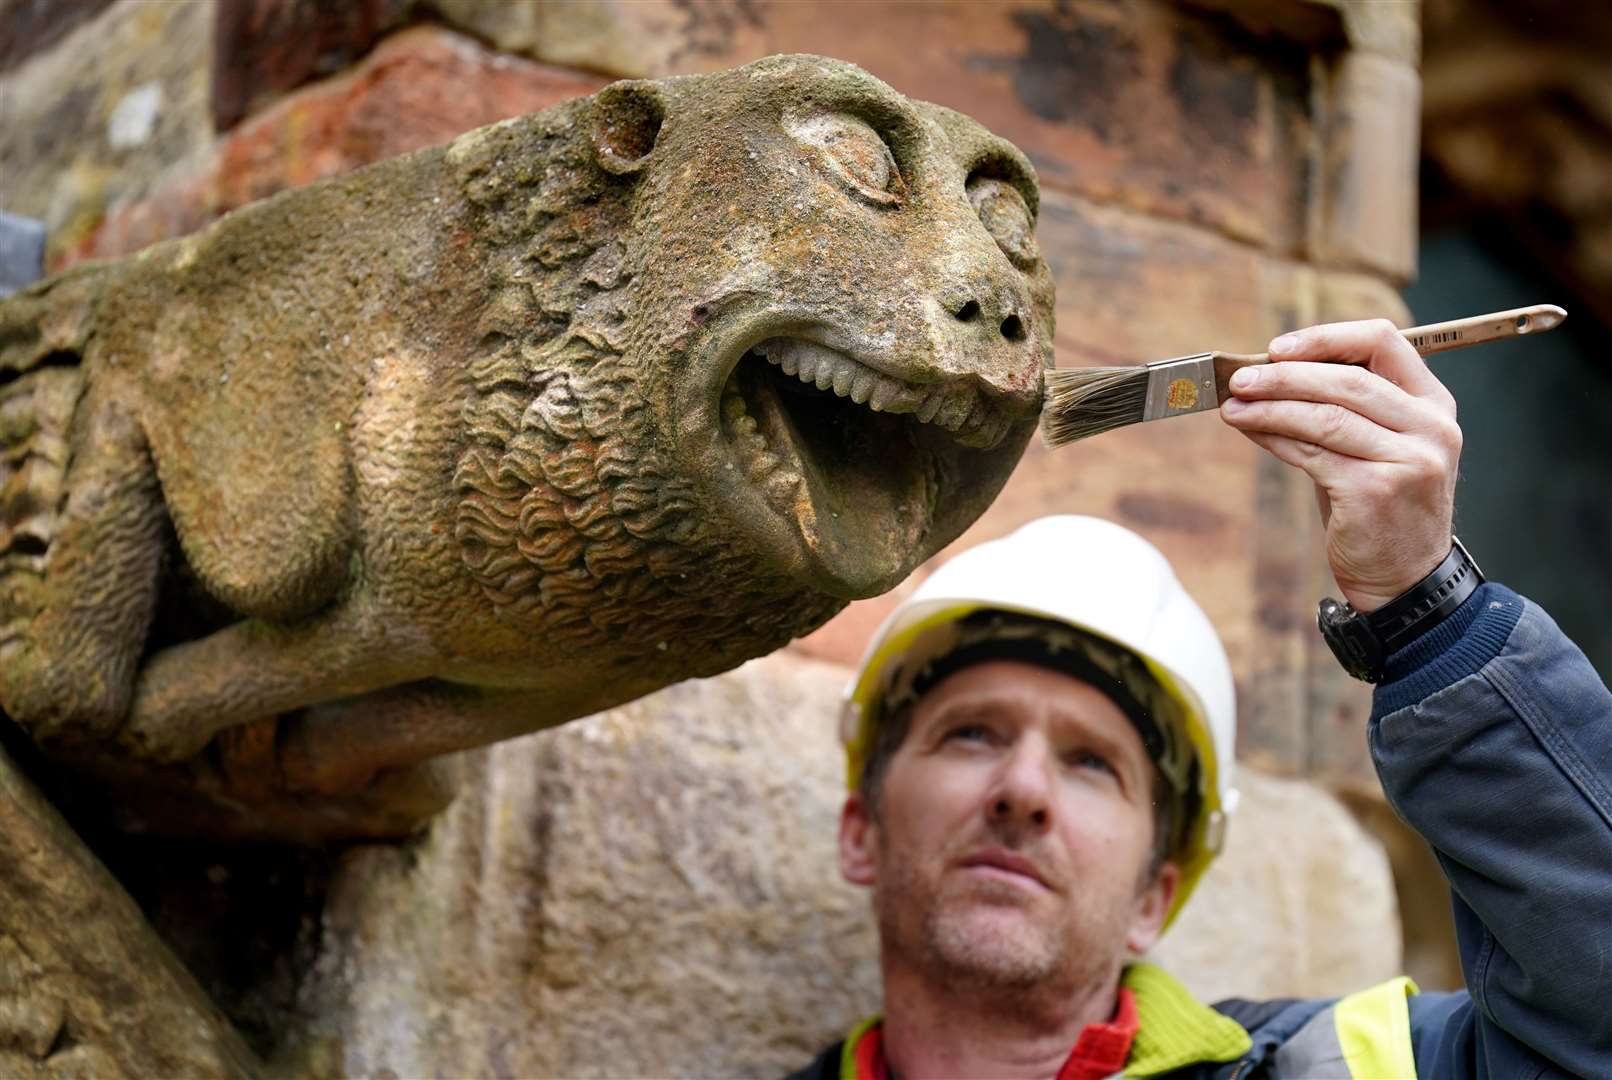 A gargoyle seemed happy to have his teeth brushed as part of conservation work at Rosslyn Chapel, Roslin, Midlothian, in May (Andrew Milligan/PA)